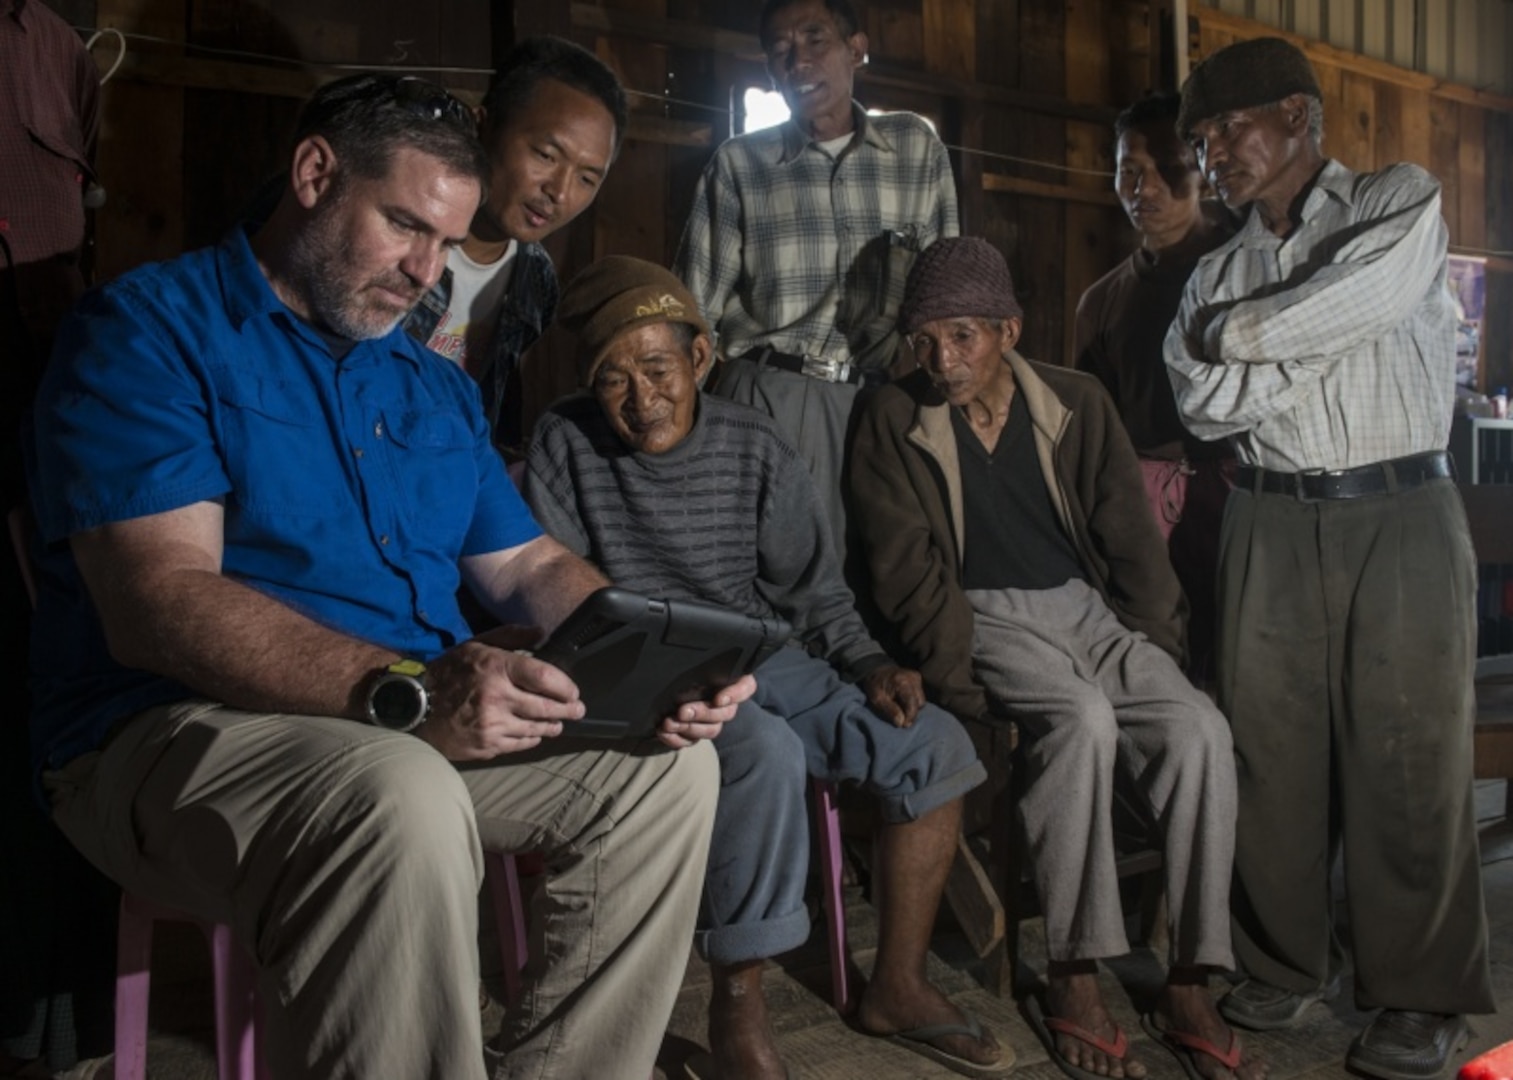 Timothy Kelliher, an analyst and investigation leader with the Defense POW/MIA Accounting Agency (DPAA), shows photos of U.S. aircrafts to a possible witness during a DPAA investigation mission in Chin State, Myanmar, May 9, 2016. Kelliher and eight DPAA team members deployed to the area in hopes of recovering the remains of seven U.S. Army Air Forces personnel unaccounted-for from World War II. The mission of DPAA is to provide the fullest possible accounting for our missing personnel to their families and the nation. 